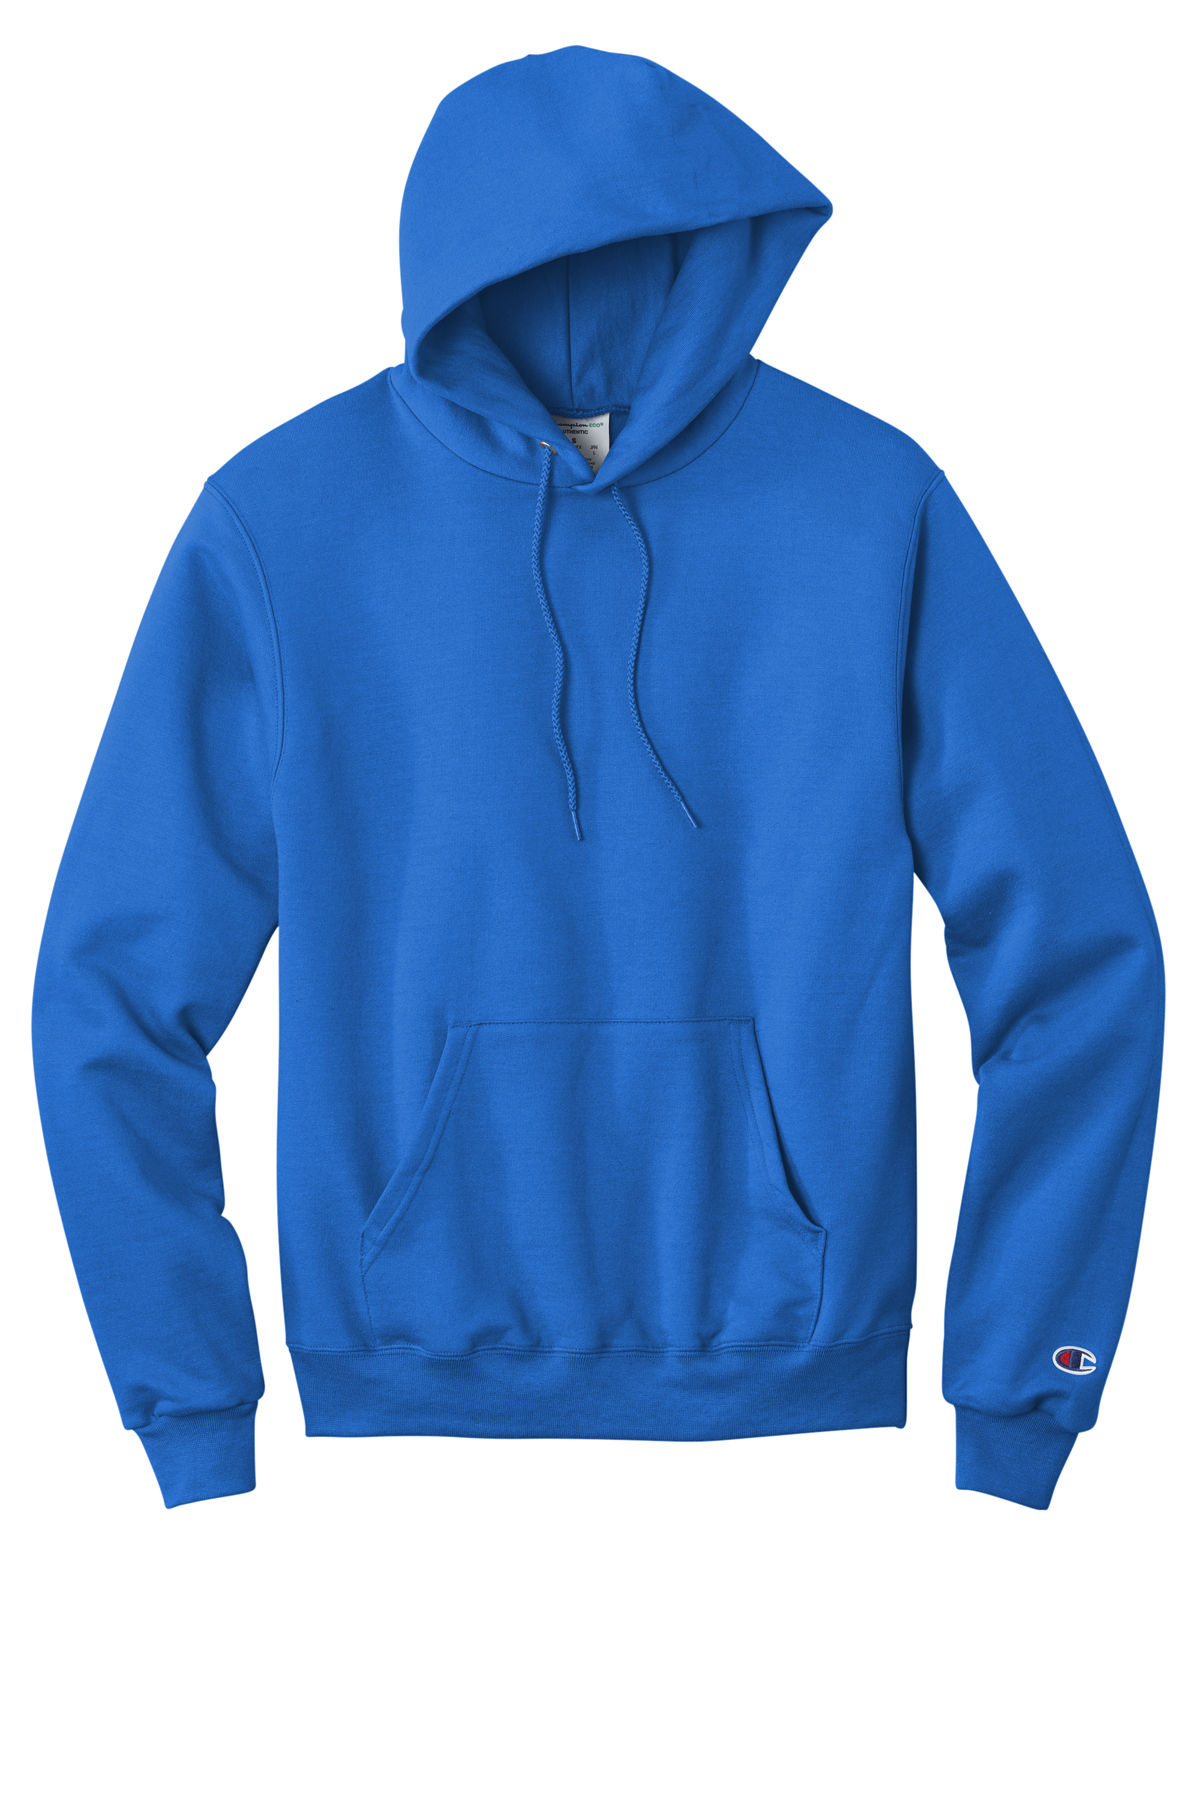 Powerblend Pullover | Product | SanMar